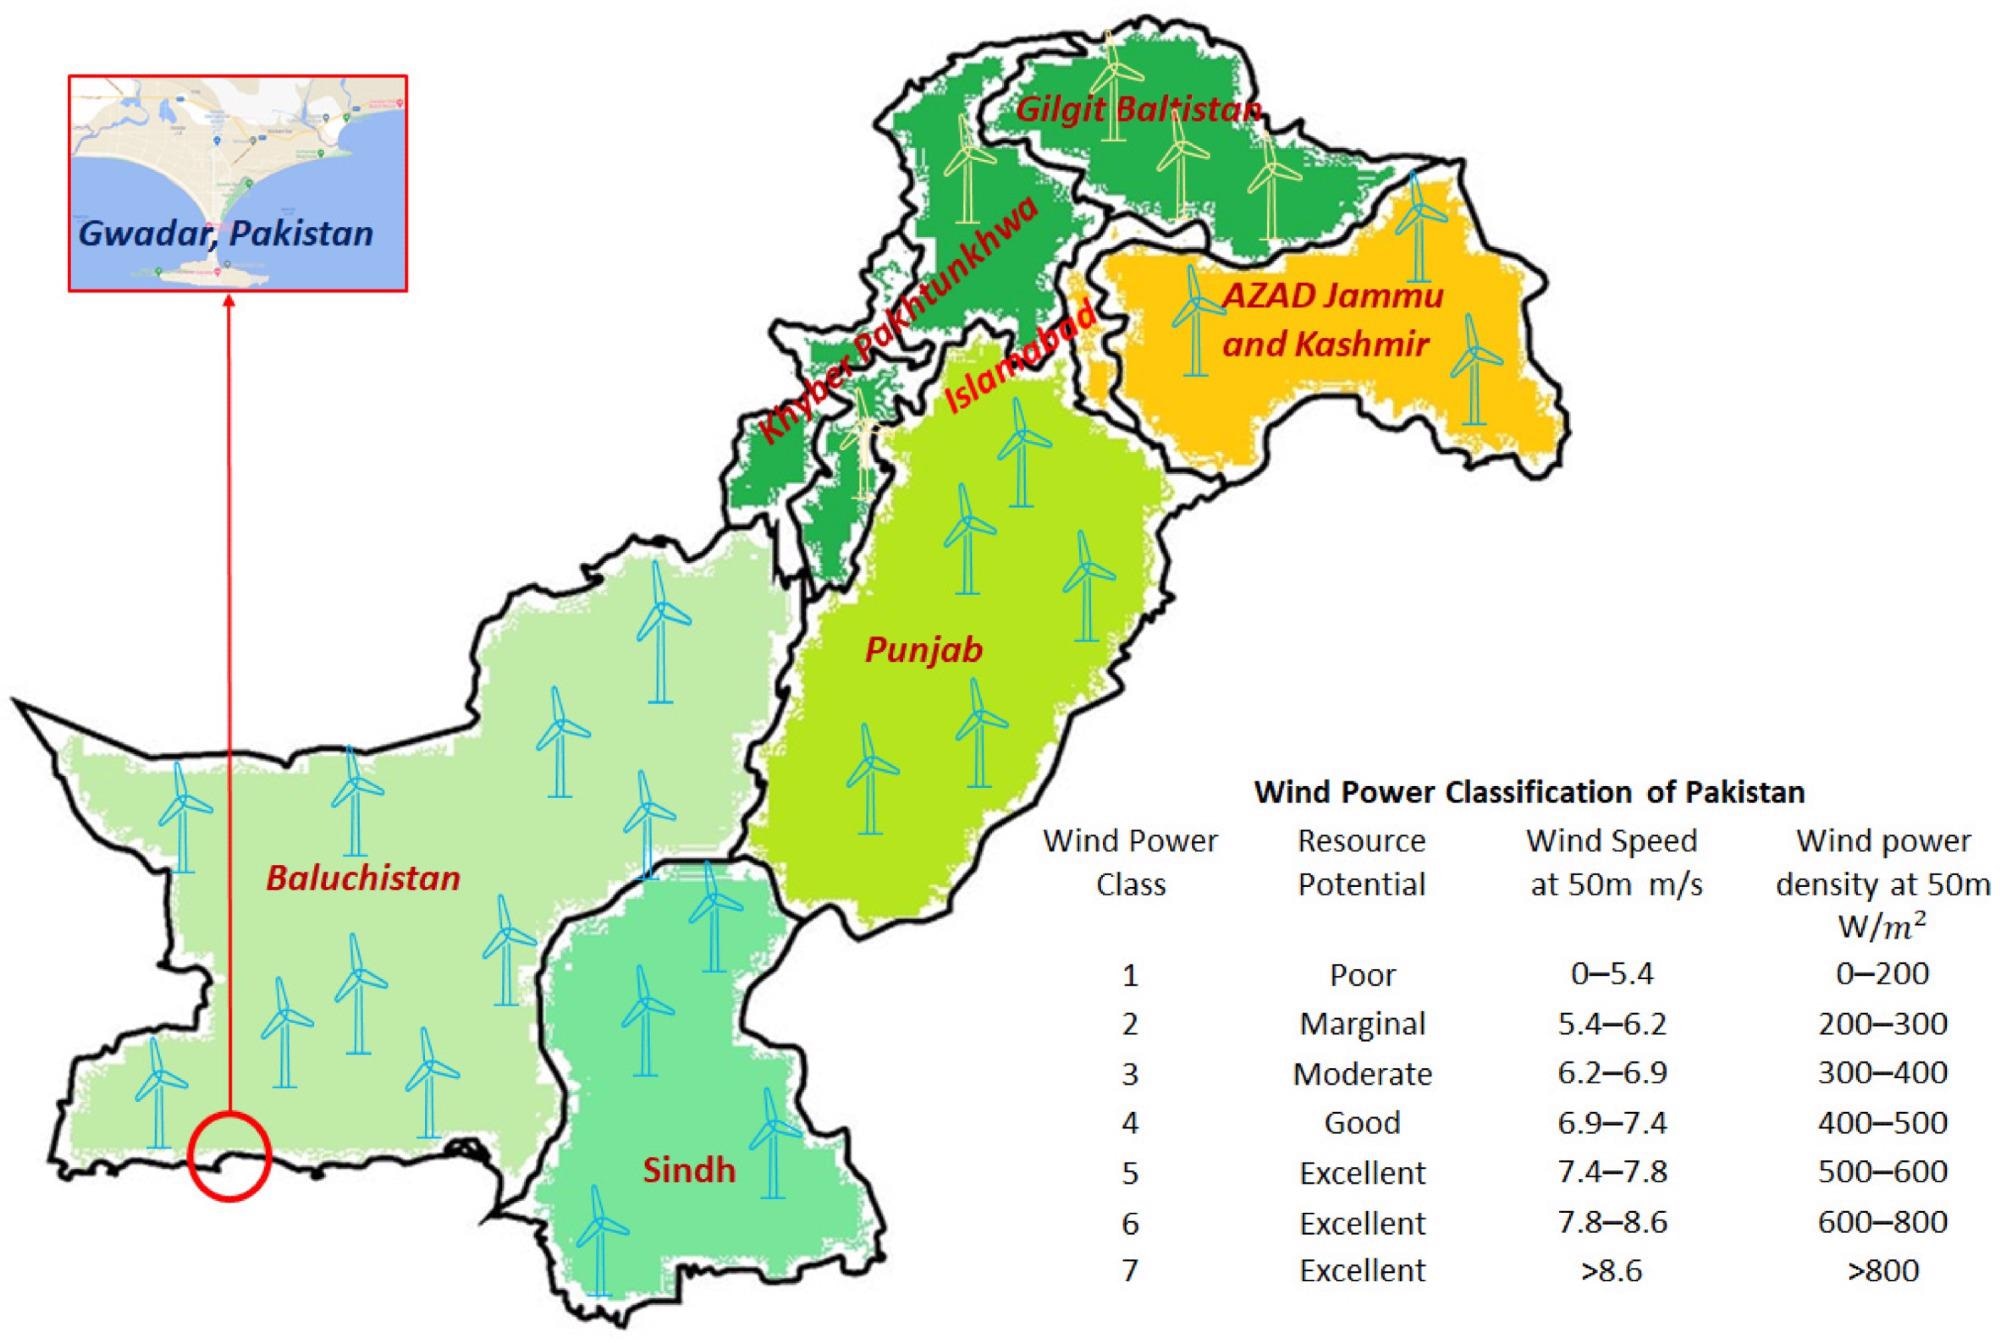 Geographical map of the wind power classification at a 50 m height in different areas in Pakistan.